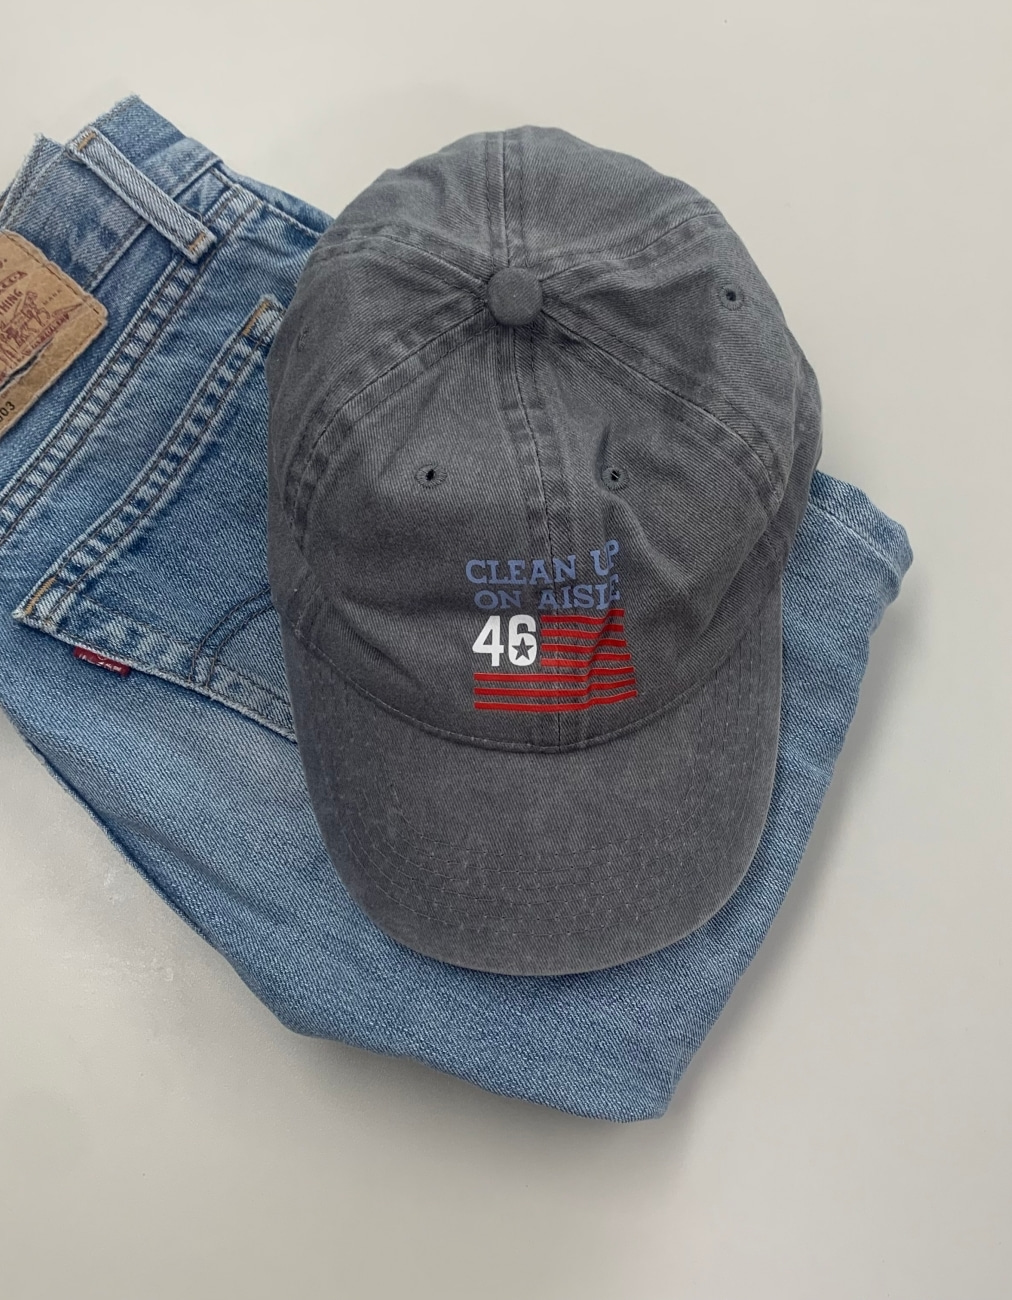 (Deadstock) Clean Up On Aisle 46 Cap